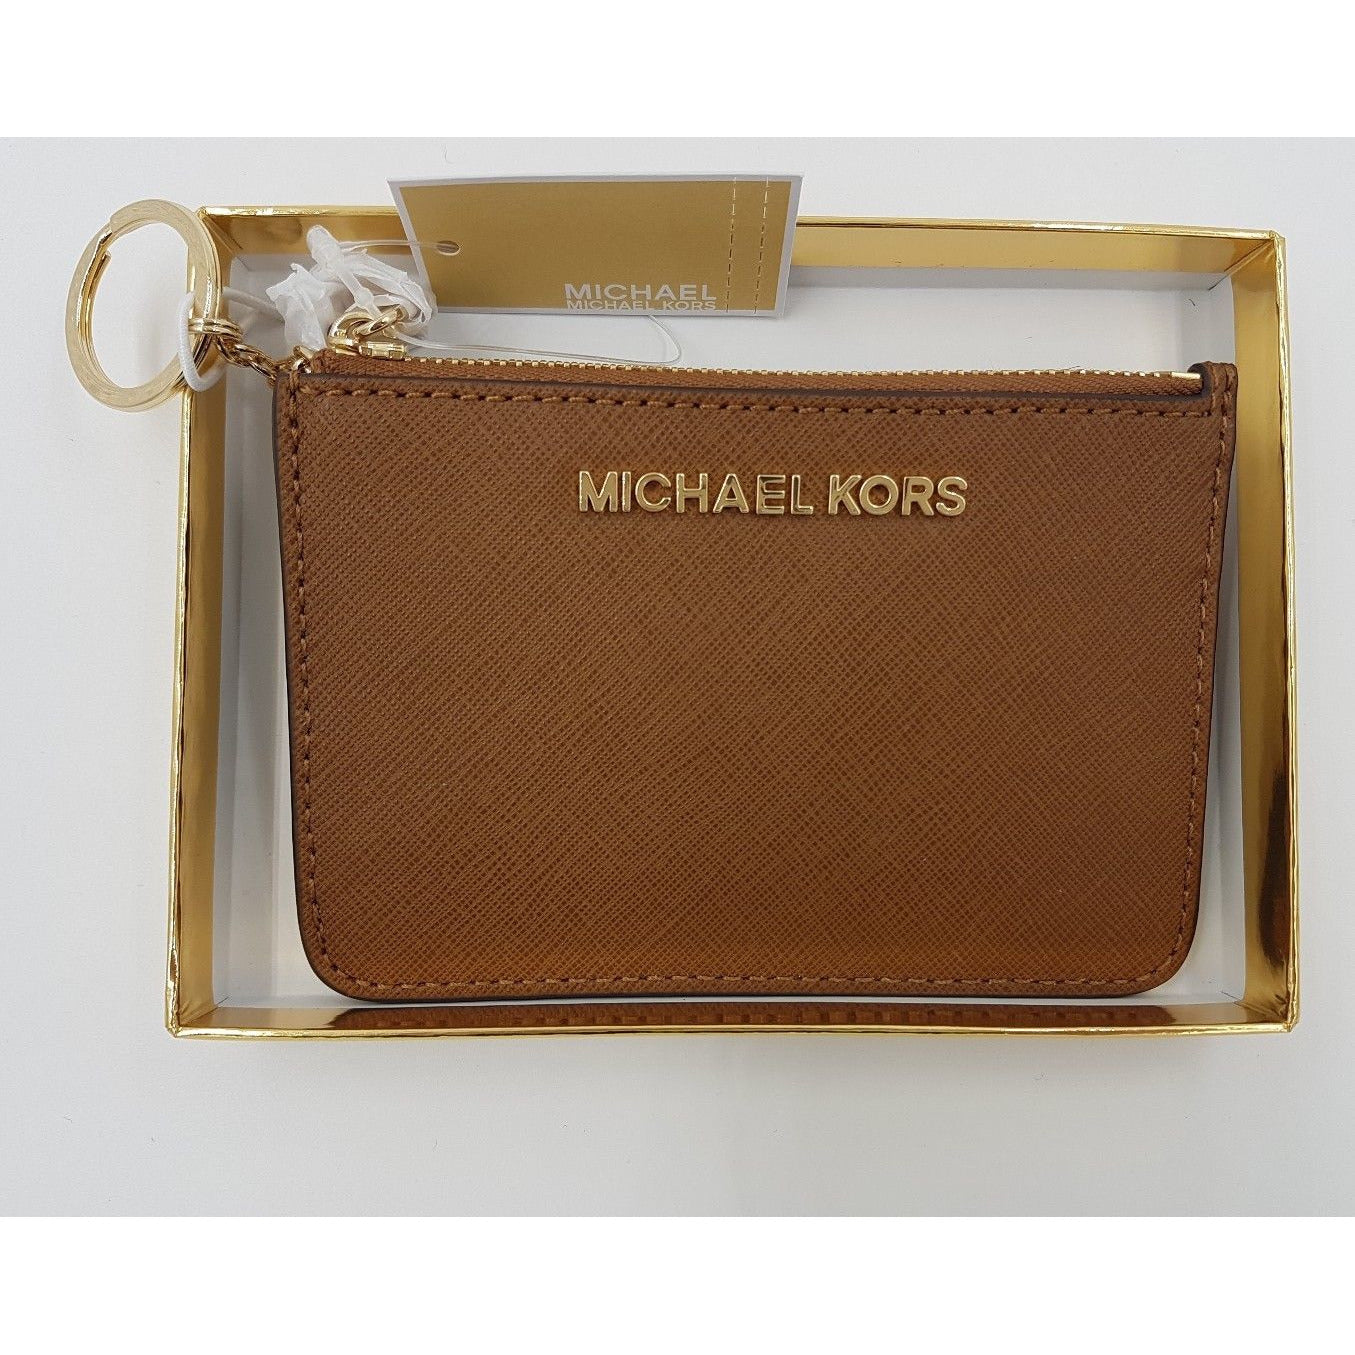 michael kors purse with wallet